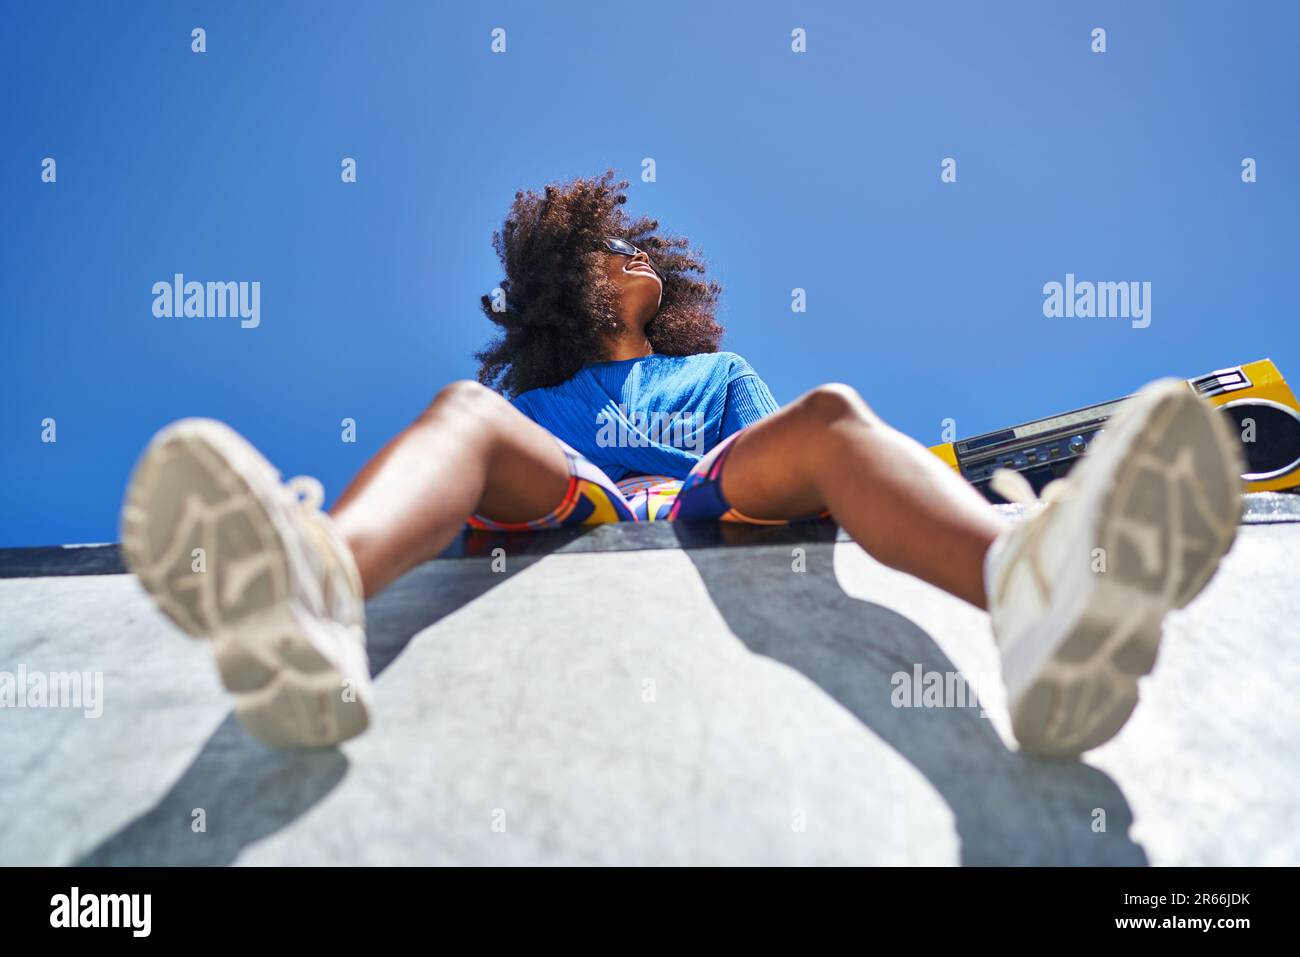 Carefree young woman with boom box at edge of sports ramp Stock Photo